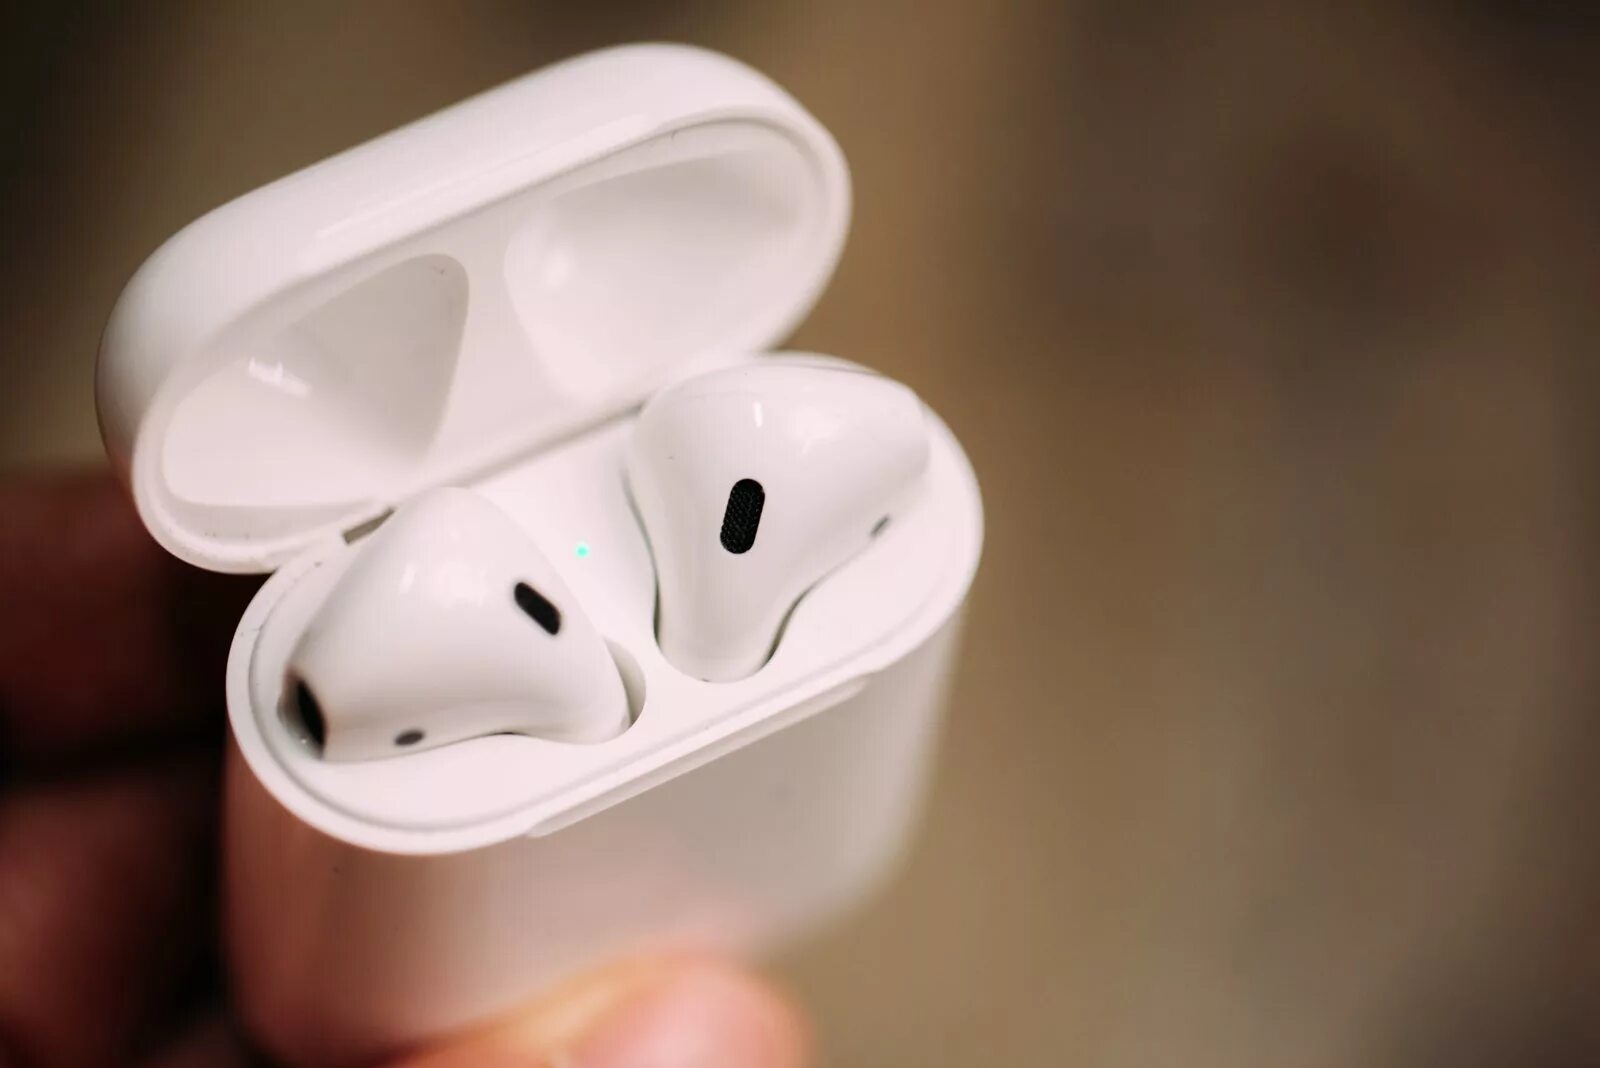 Airpods pro заряд. Apple AIRPODS 2. Apple AIRPODS 2 Wireless Charging Case. Аирподс 1. Case Apple AIRPODS Pro 2.